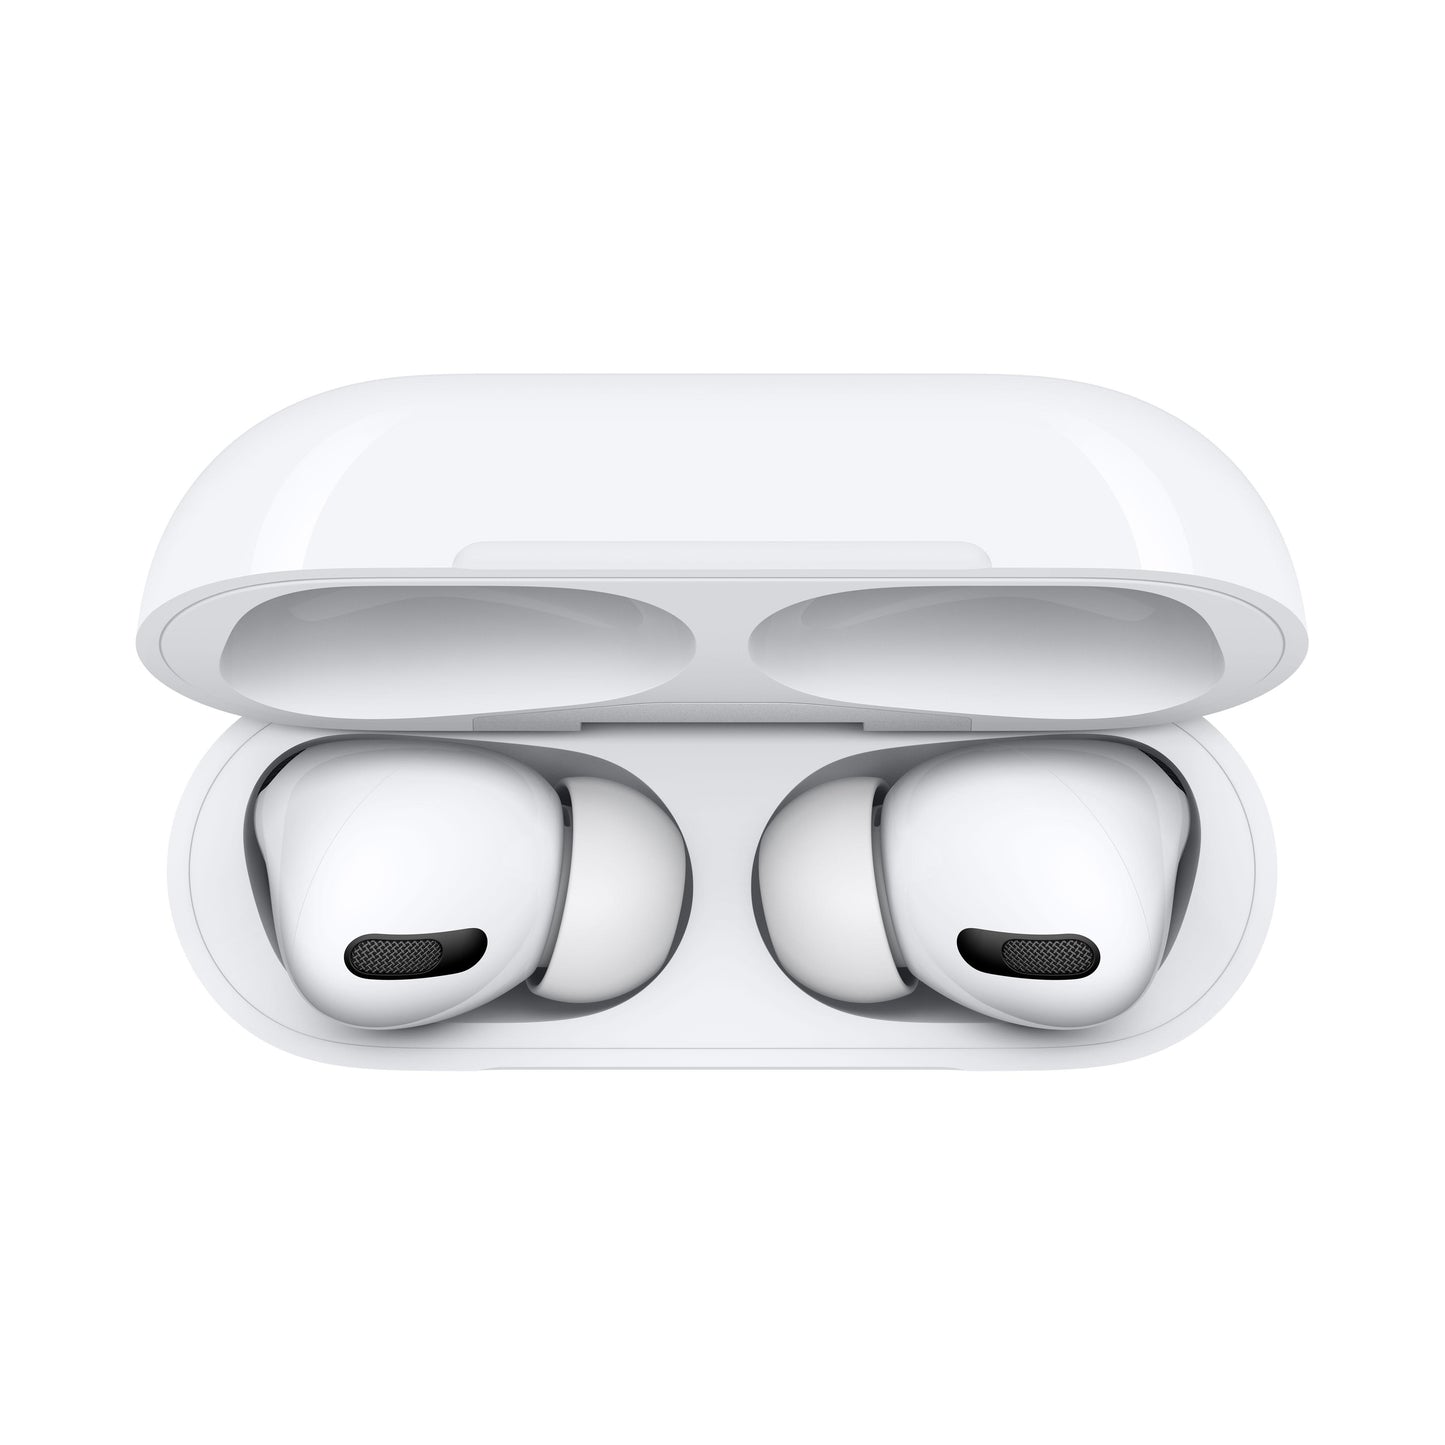 AirPods Pro with MagSafe Charging case